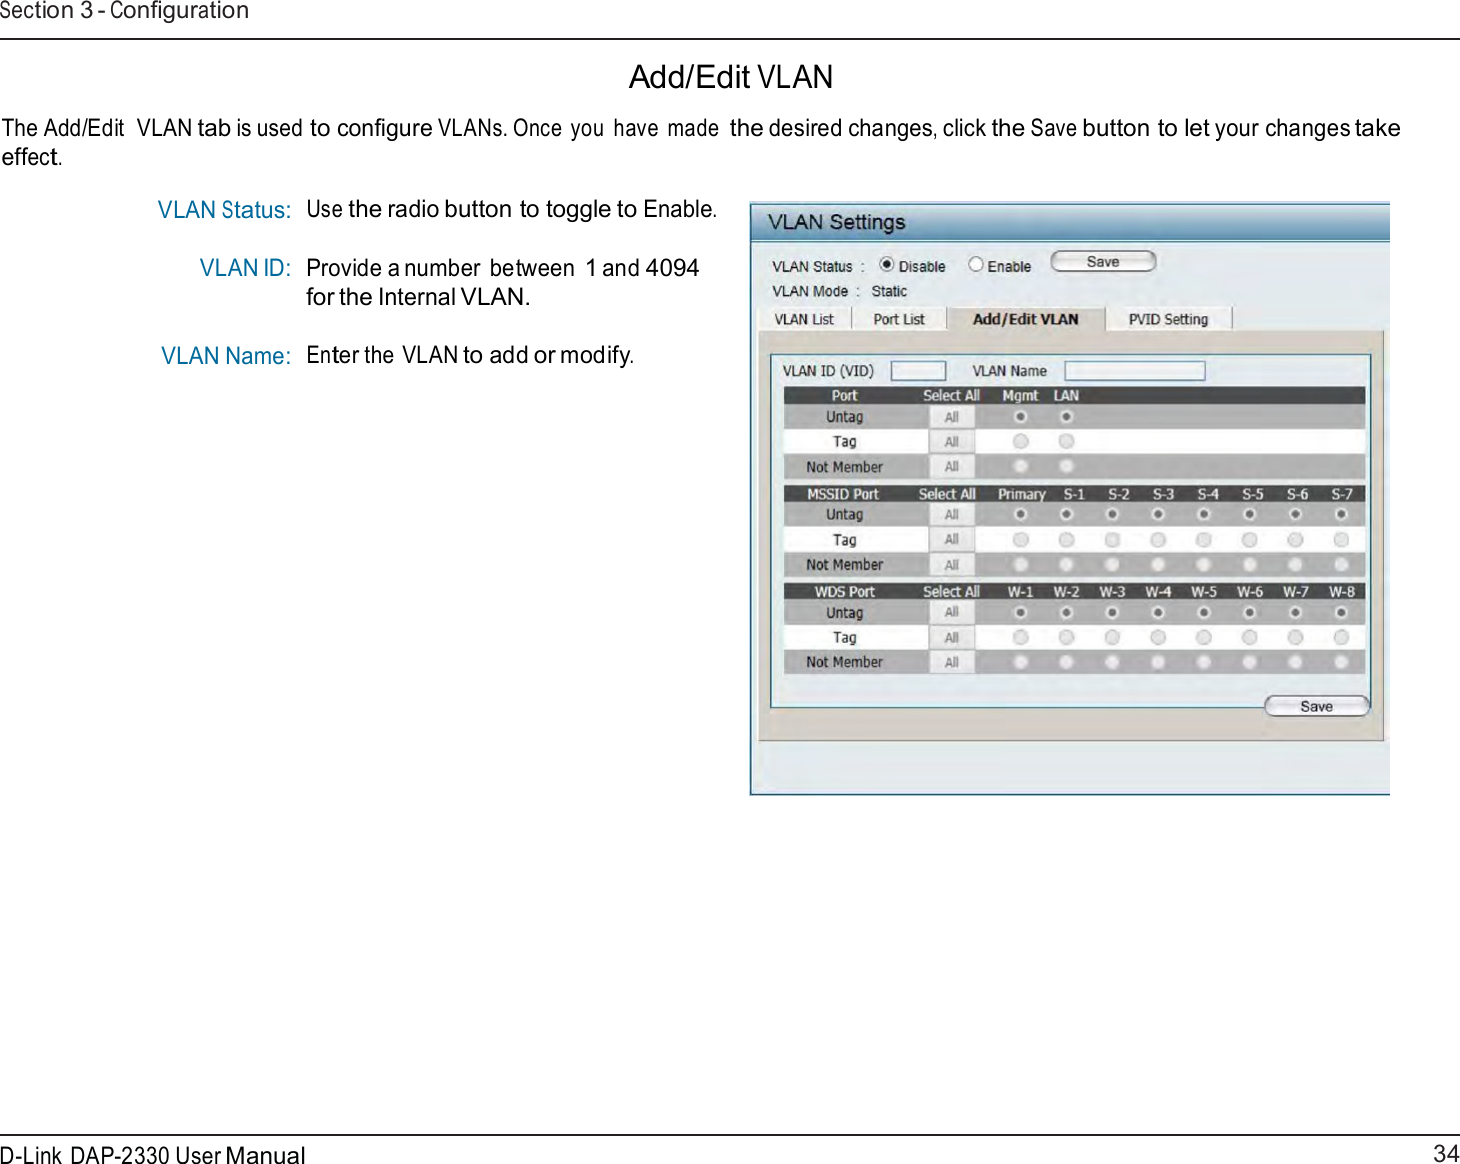 34 D-Link DAP-2330 User ManualSection 3 - Configuration      Add/Edit VLAN  The Add/Edit  VLAN tab is used to configure VLANs. Once you  have made the desired changes, click the Save button to let your changes take effect.  VLAN Status: VLAN ID:  VLAN Name: Use the radio button to toggle to Enable.   Provide a number between 1 and 4094 for the Internal VLAN.  Enter the VLAN to add or modify. 